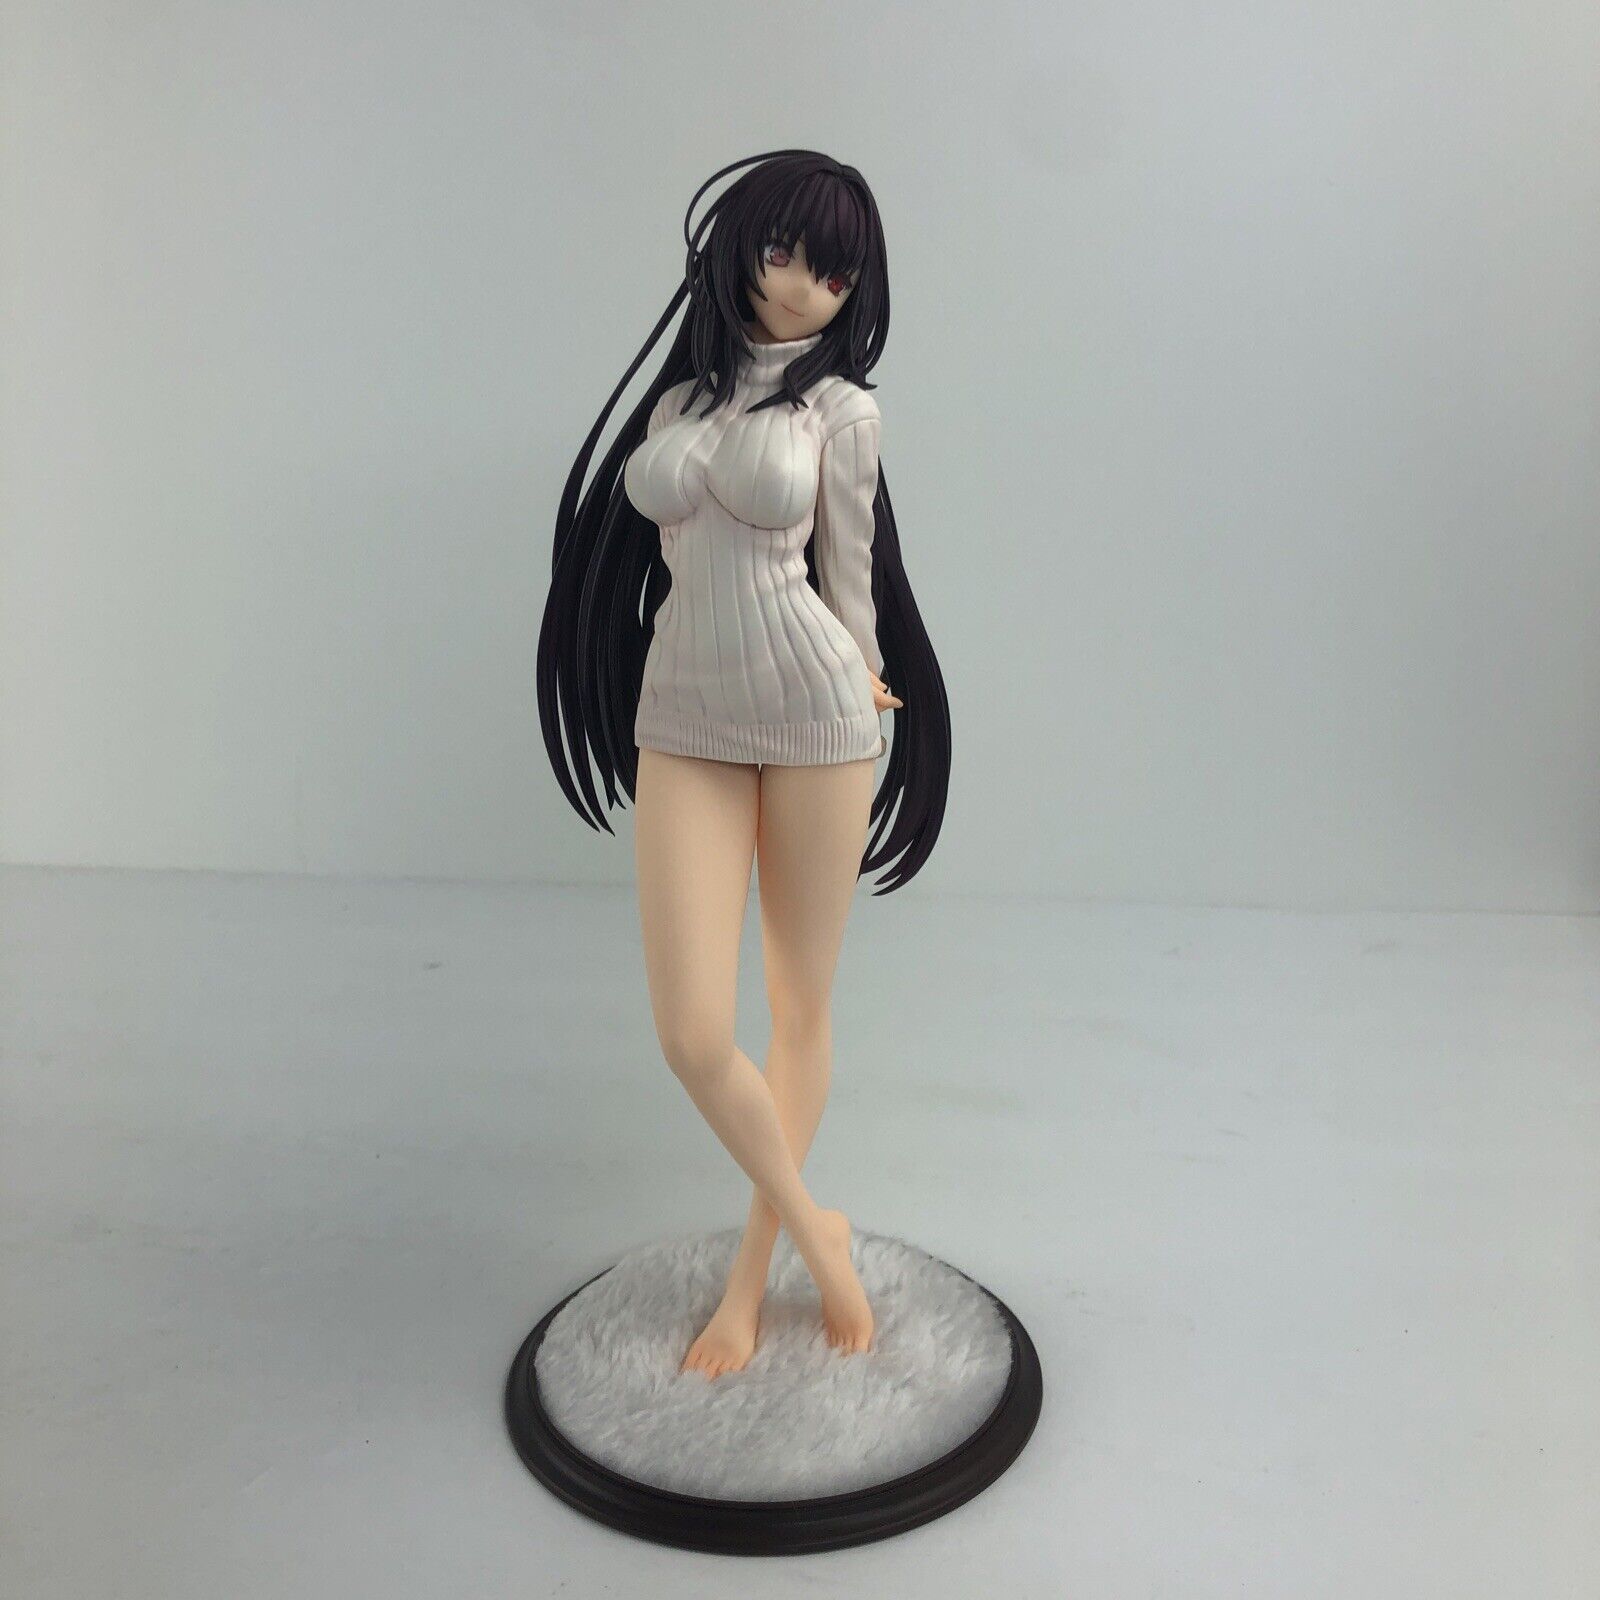 ALTER Fate/Grand Order: Scathach Roomwear Mode 1:7 Scale Pvc Vinyl Anime Figure